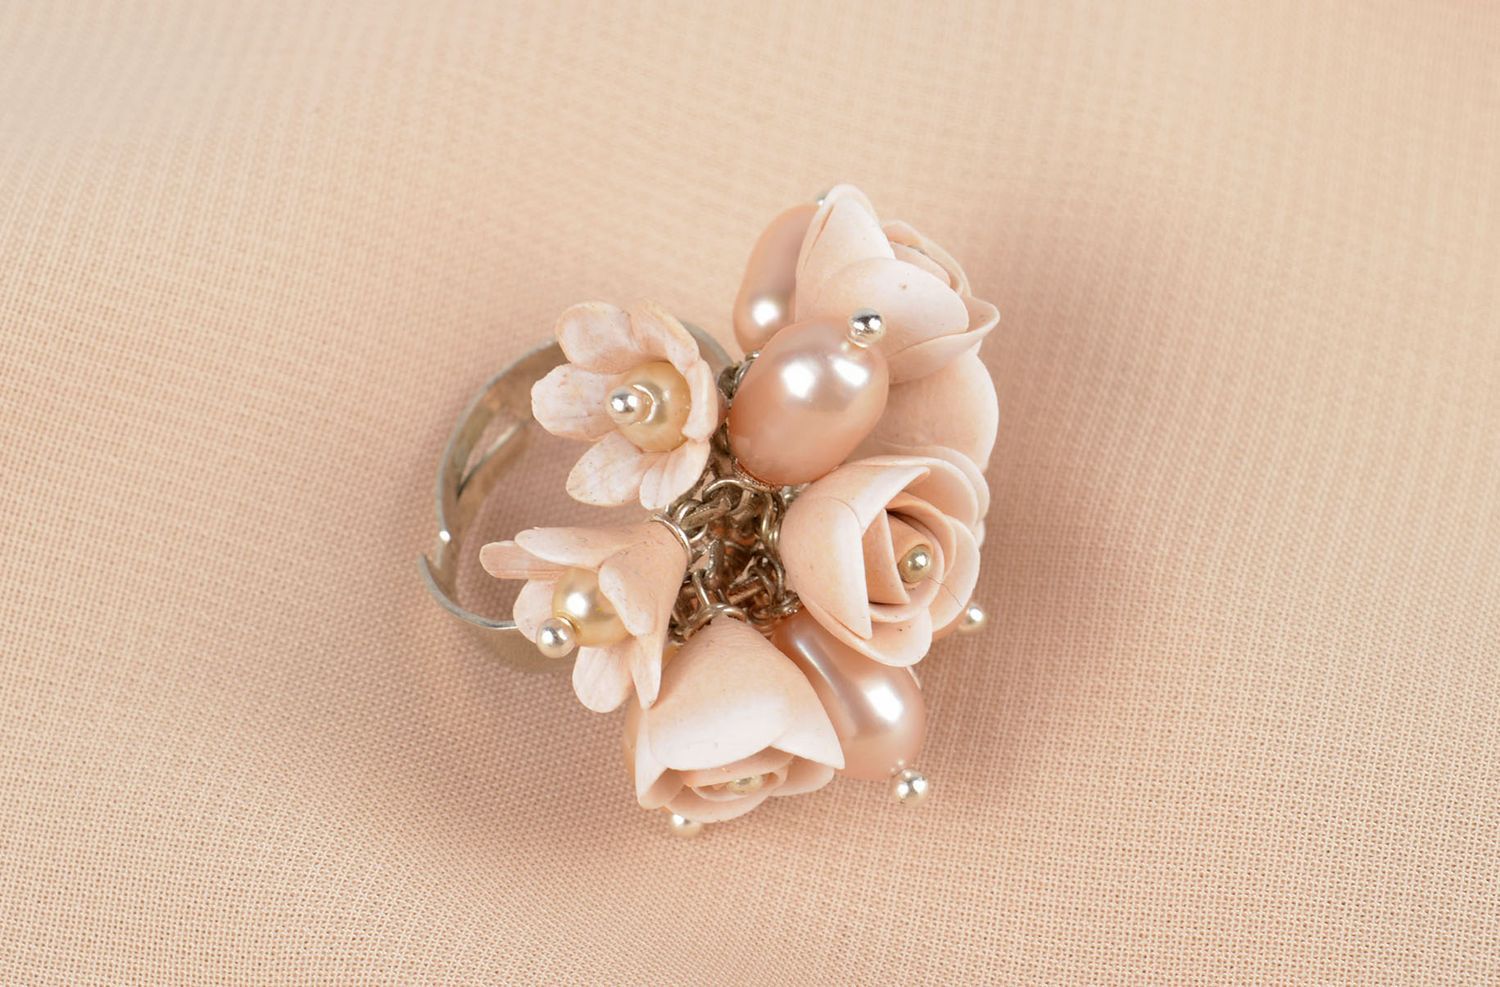 Handmade polymer clay ring with flowers stylish ring fashion jewelry for women photo 5